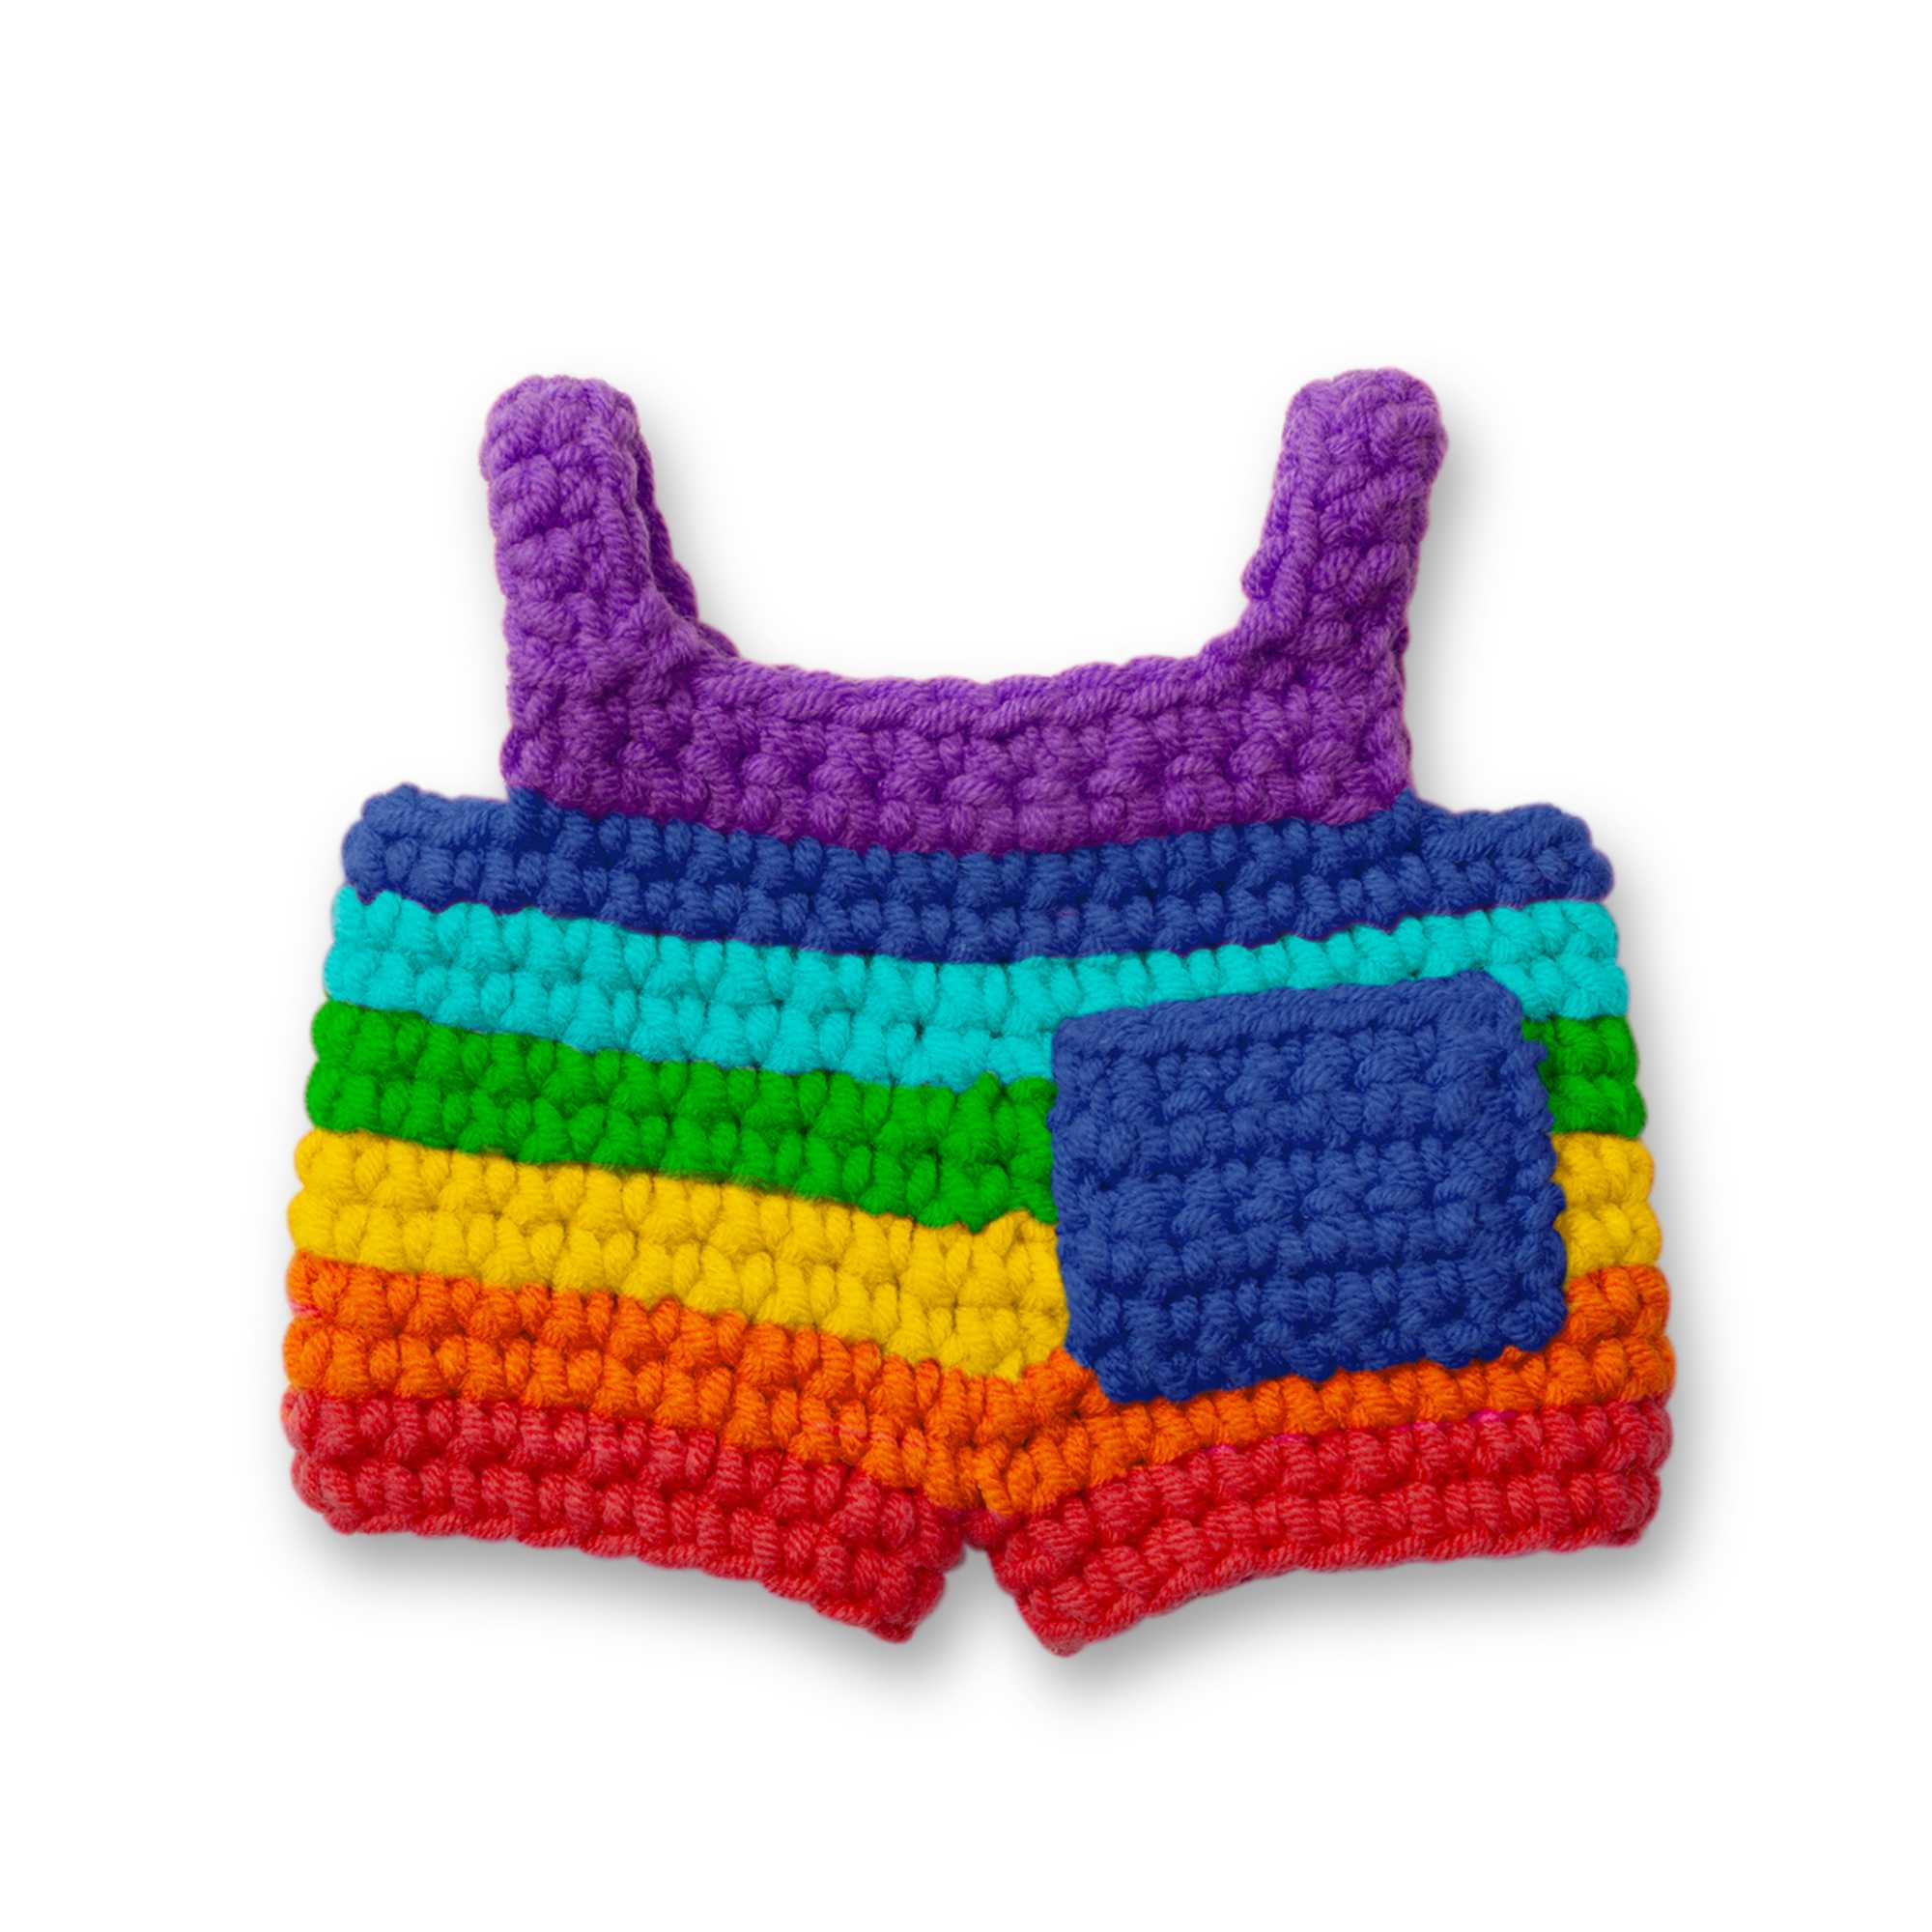 Just Dutch handmade crocheted outfit,  bright rainbow overall